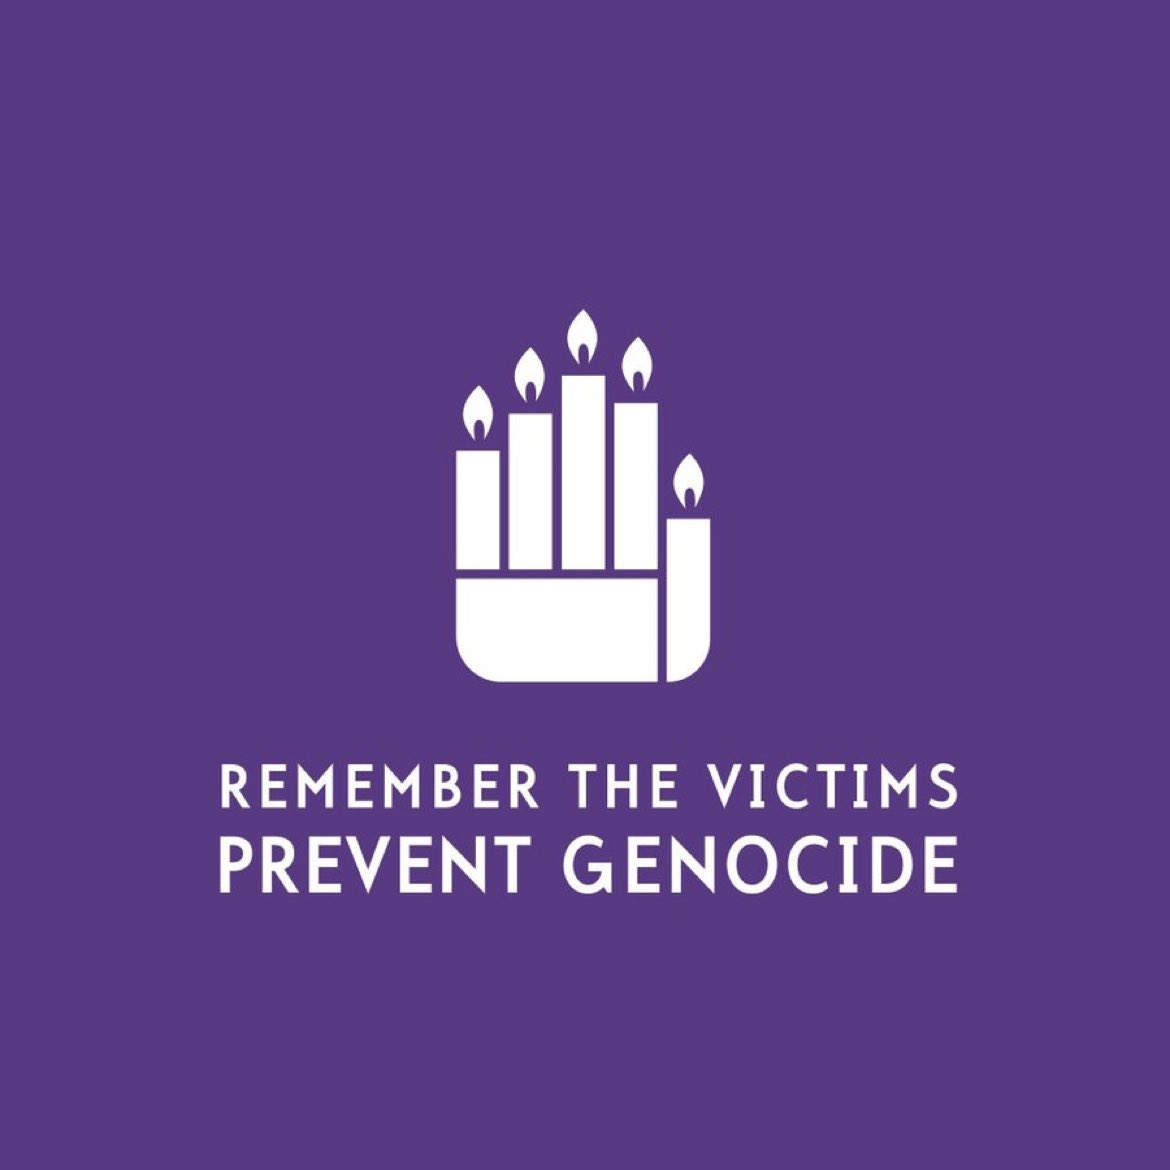 Genocide, whether committed in time of peace or in time of war, is a crime under international law. No one should endure the horror of genocide.

On the 75th anniversary of the Genocide Convention, let's make sure we #PreventGenocide and #RememberTheVictims 🕯️

#TigrayGenocide